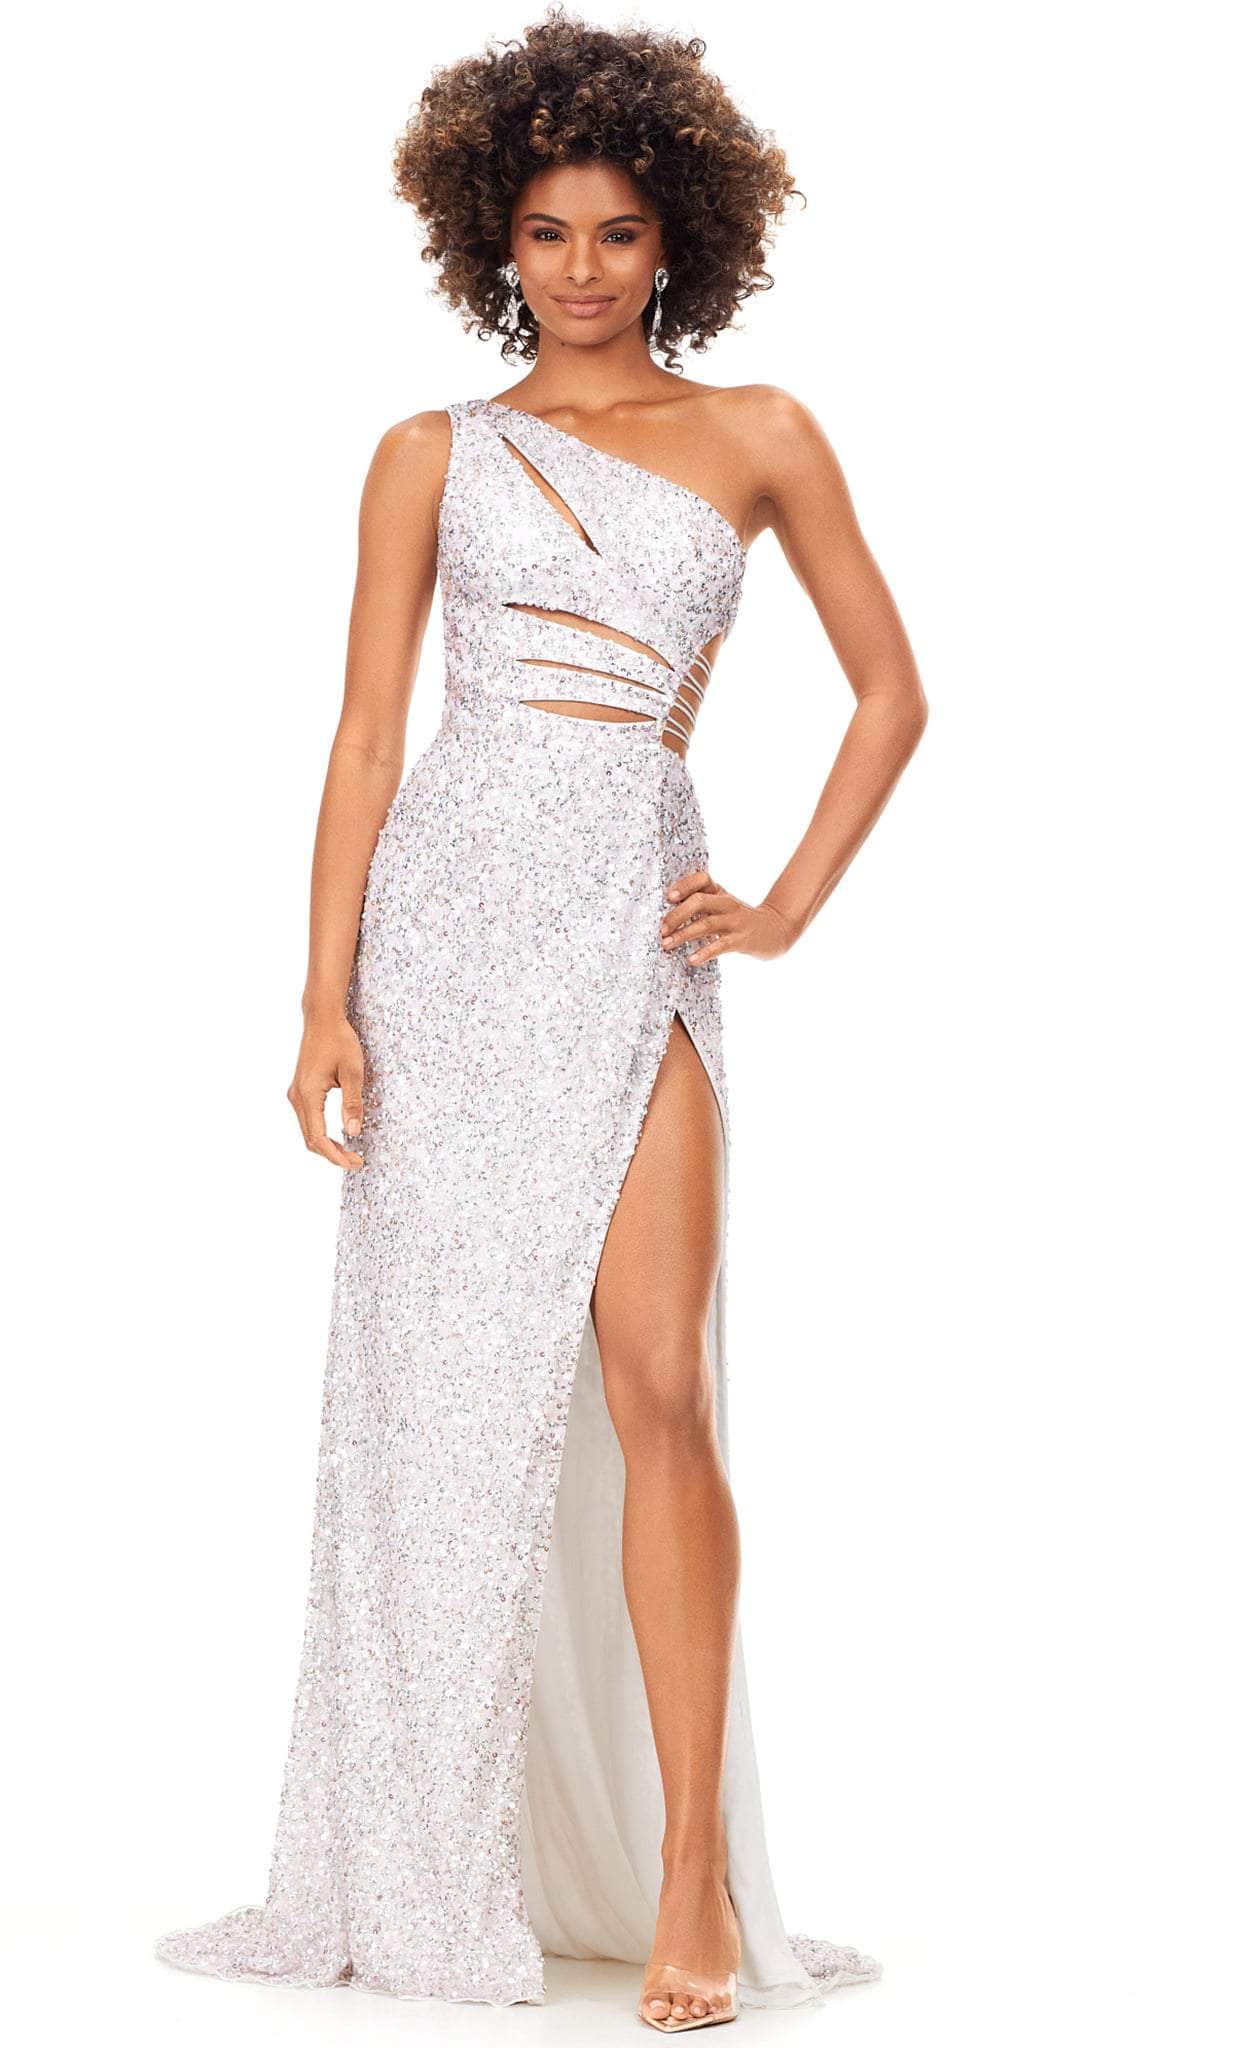 Image of Ashley Lauren 11288 - Sequined Cutout Evening Gown